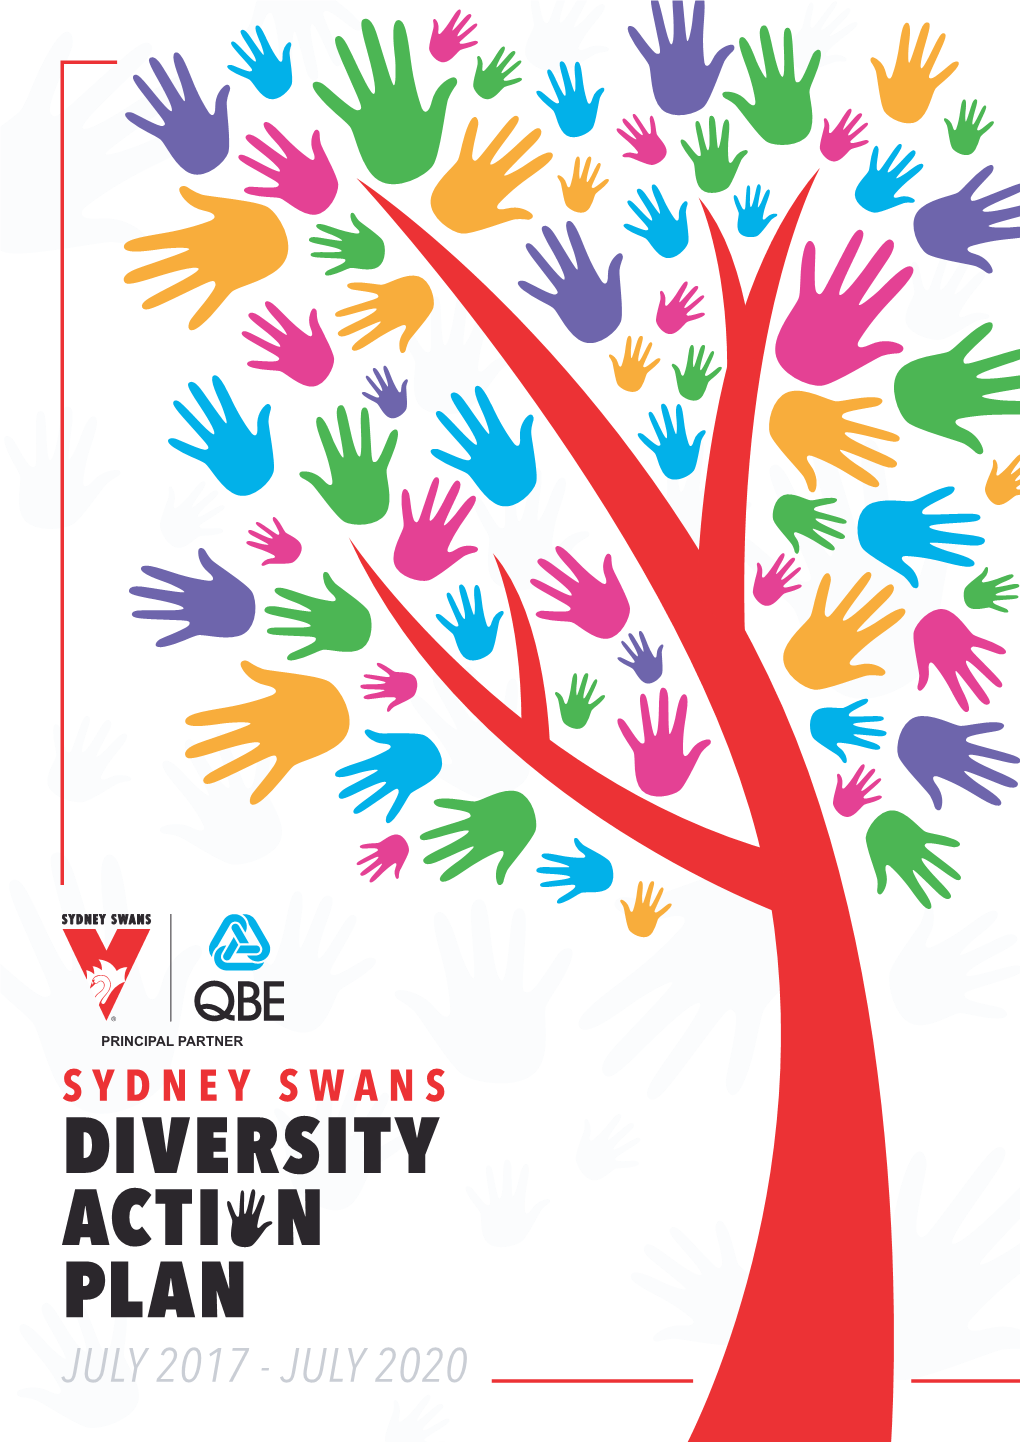 Sydney Swans Diversity Acti N Plan July 2017 - July 2020 Our Vision